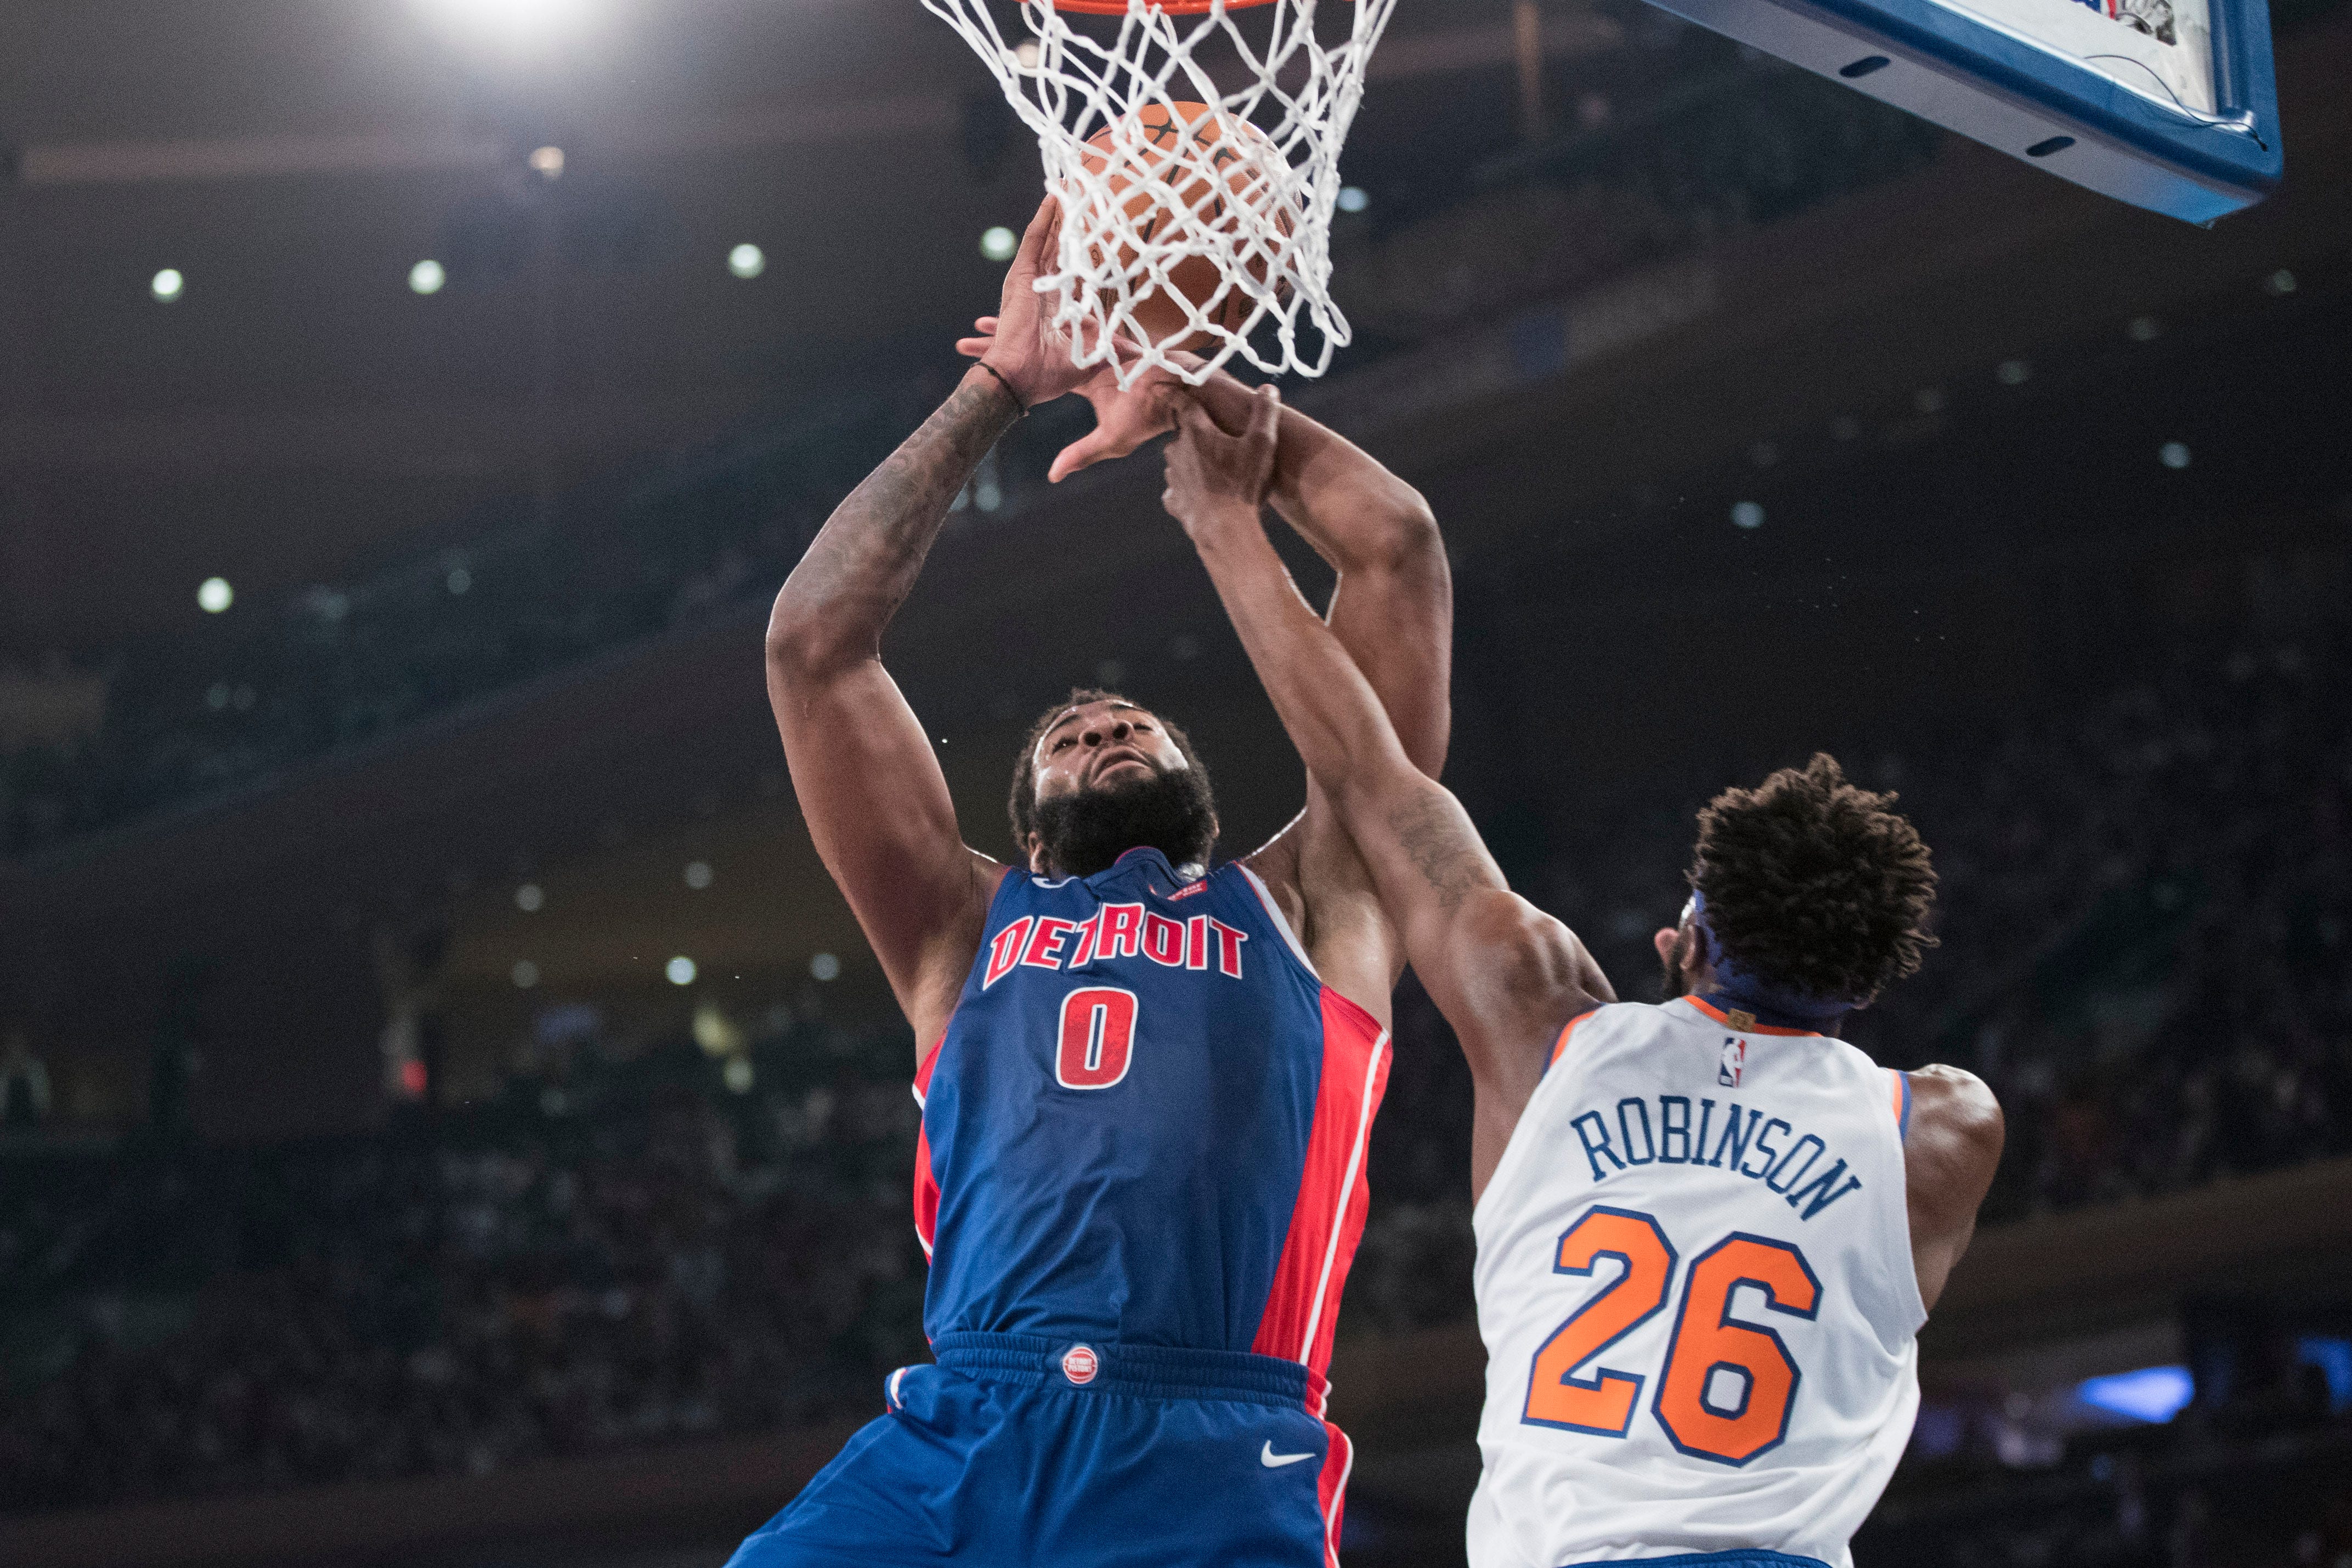 Detroit Pistons center Andre Drummond (0) goes to the basket against New York Knicks center Mitchell Robinson (26) during the first half.